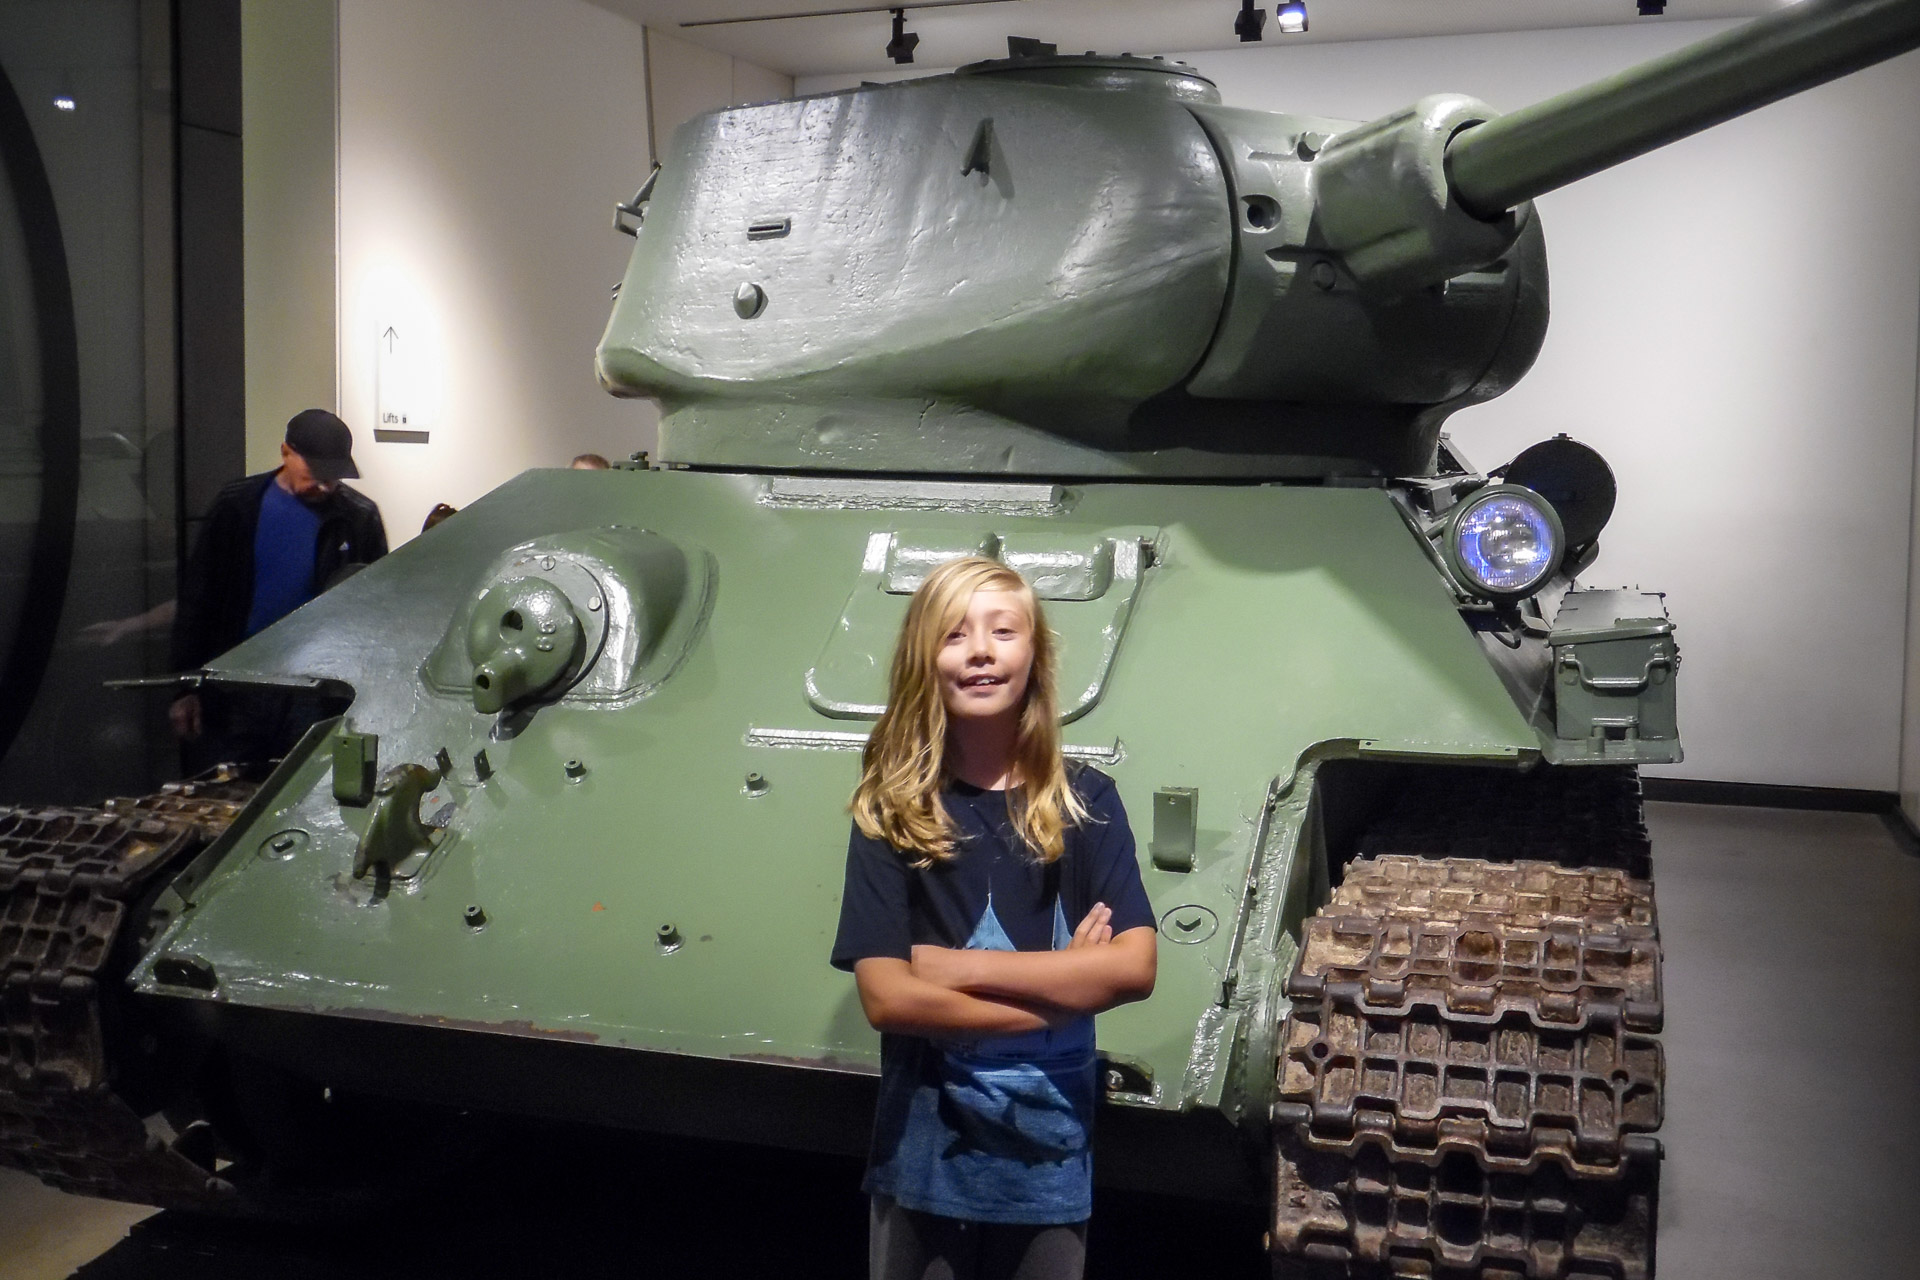 Kyle and Soviet T-34 tank at the Imperial War Museum in London